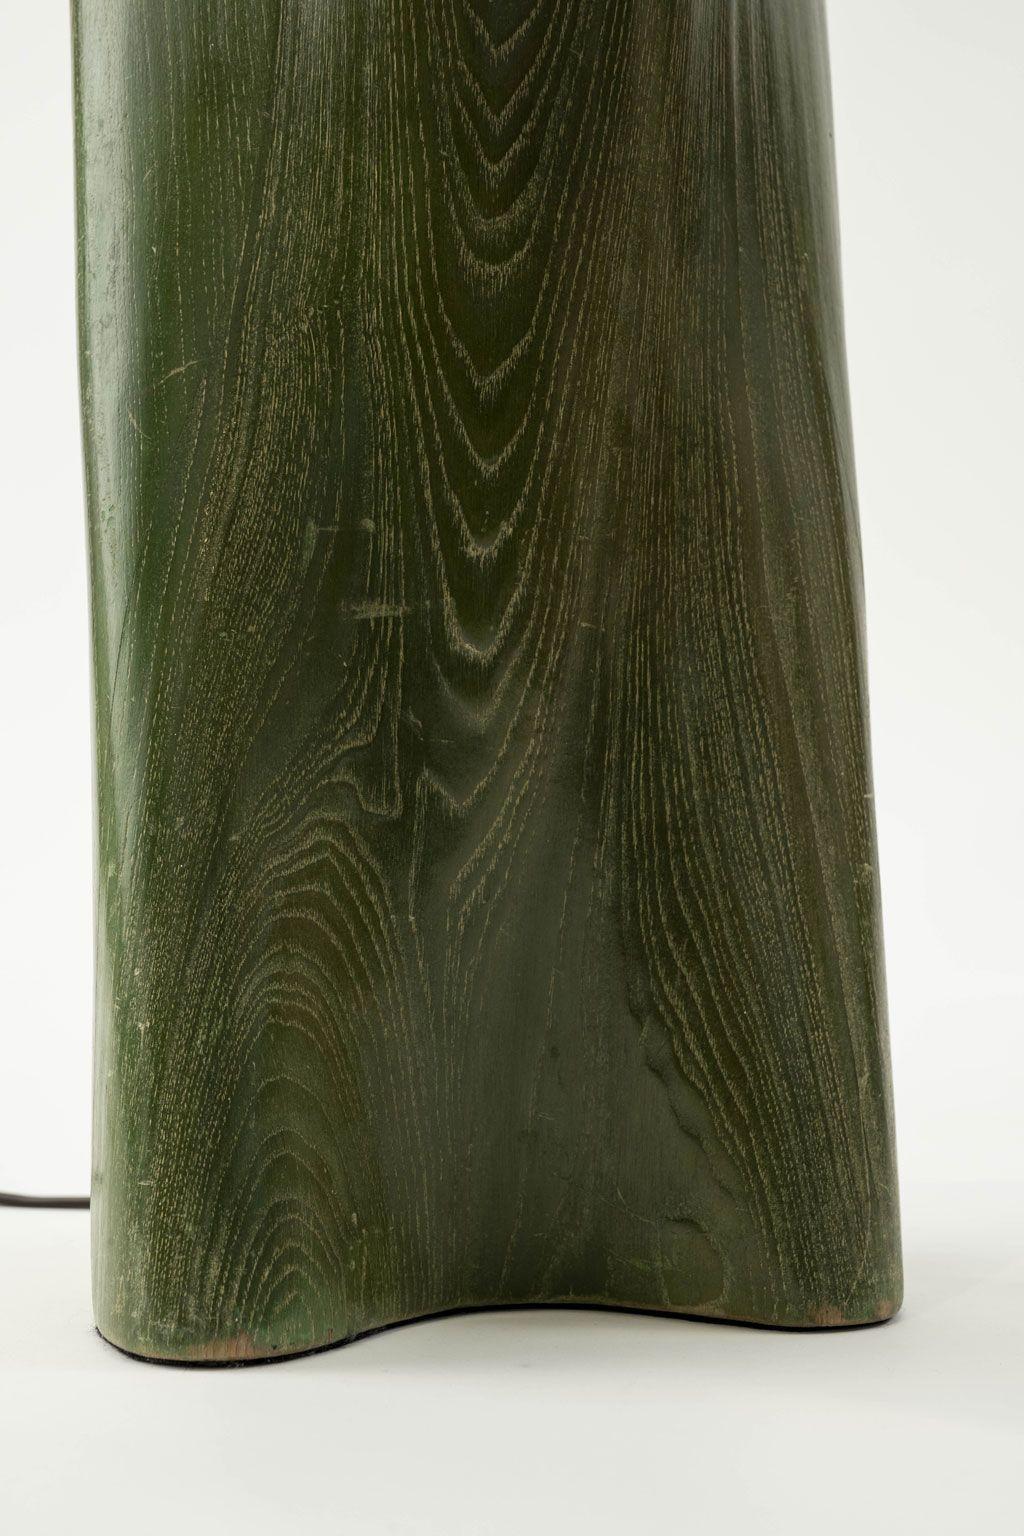 Modern Green-Dyed Carved Wood Table Lamp For Sale 4